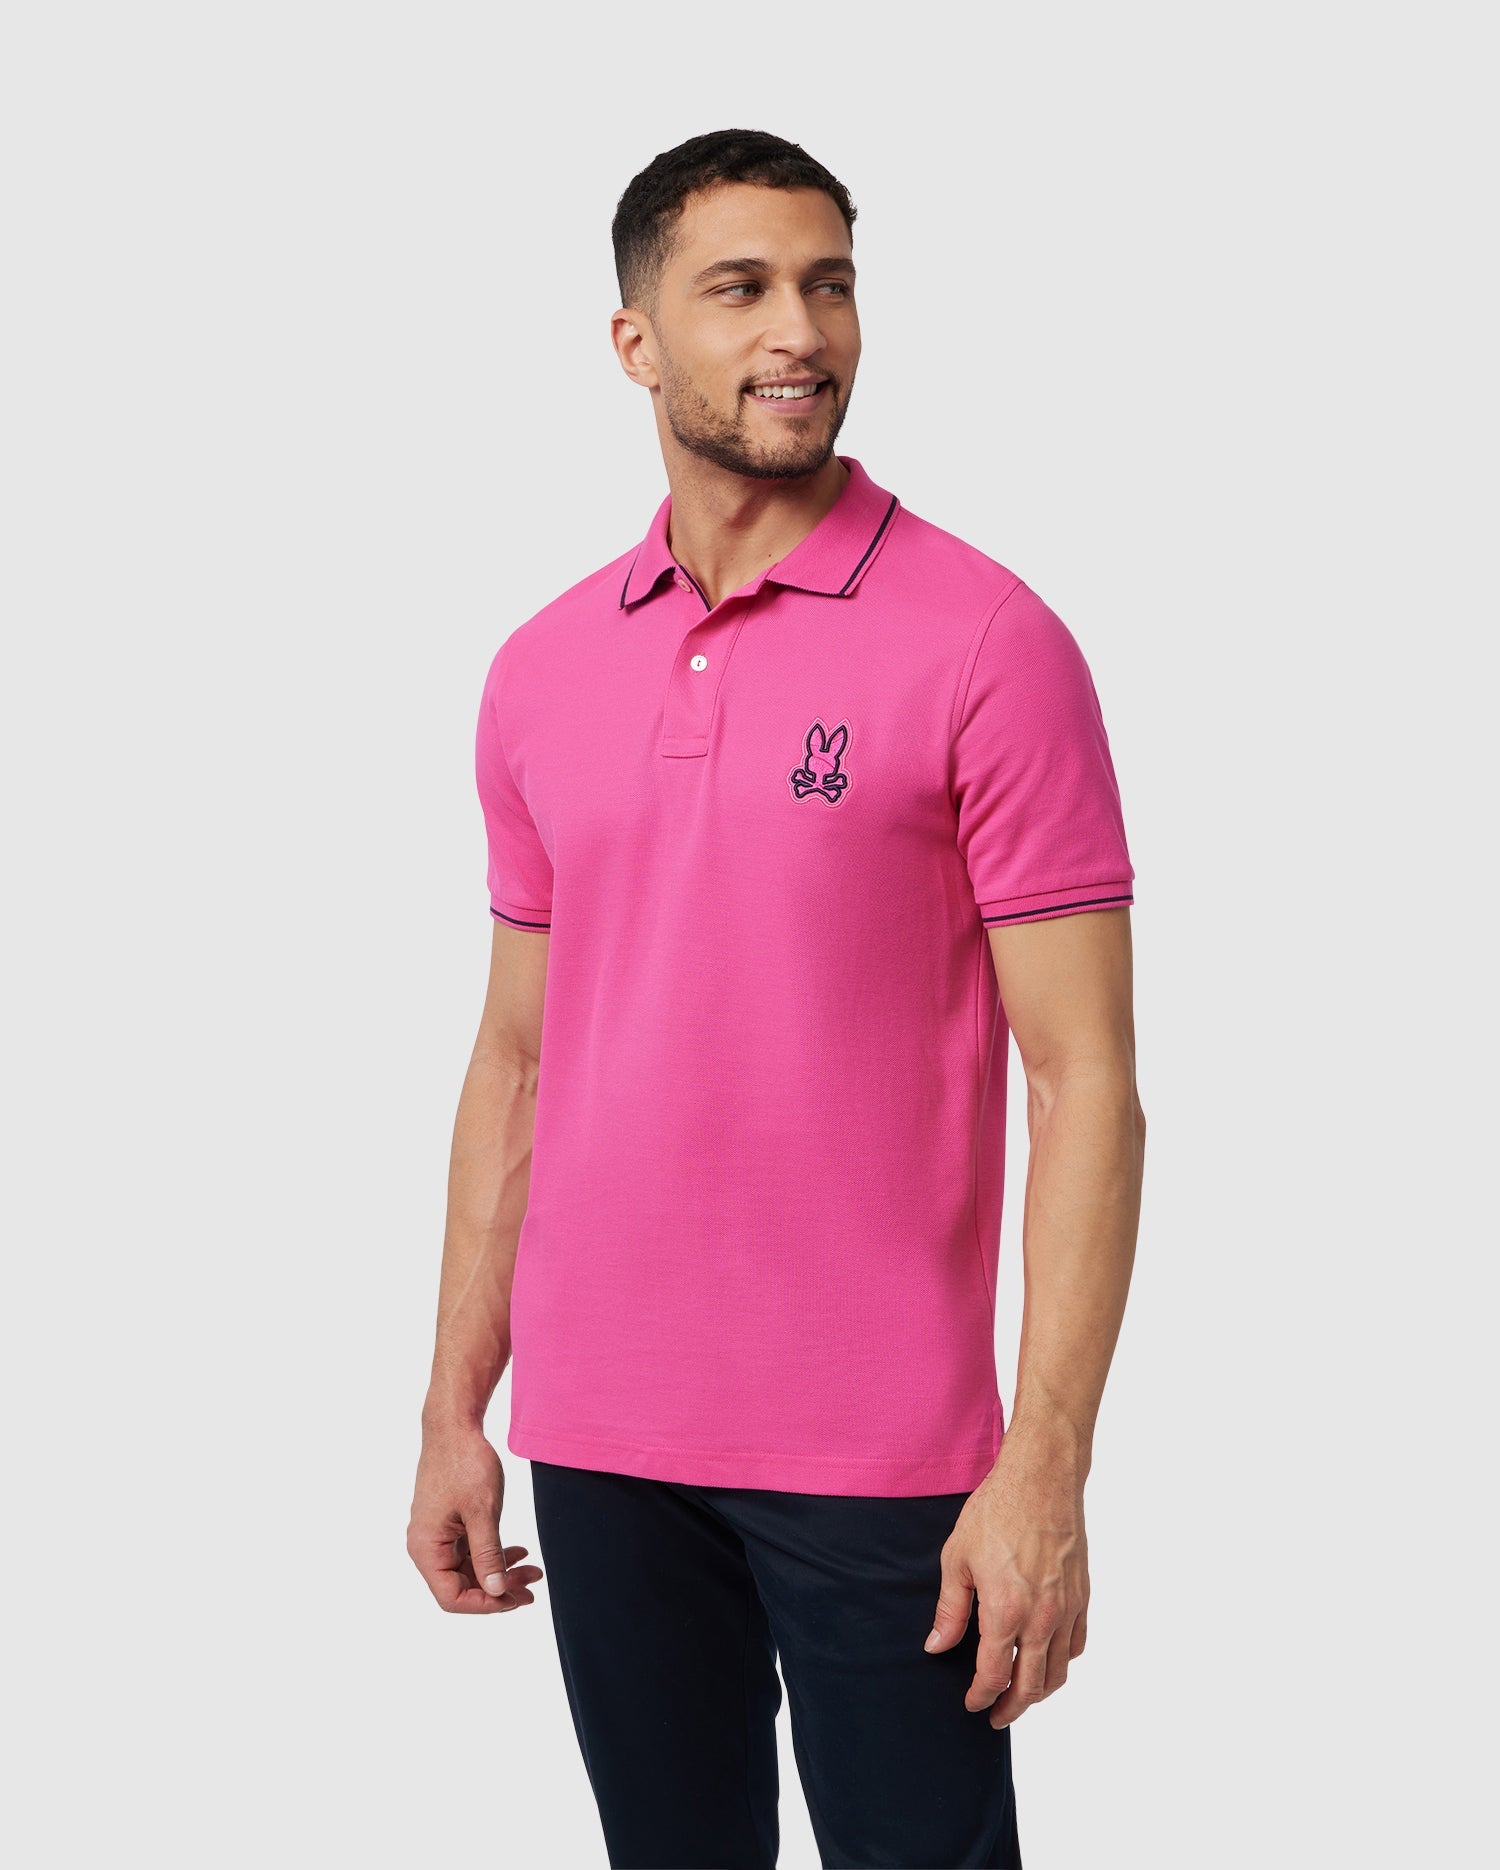 A man with short hair and a beard wears a pink Psycho Bunny MENS LENOX PIQUE POLO SHIRT - B6K138B200 made of soft Pima cotton, featuring an embroidered Bunny logo on the chest. He is looking to his right and is smiling slightly. The background is plain white.